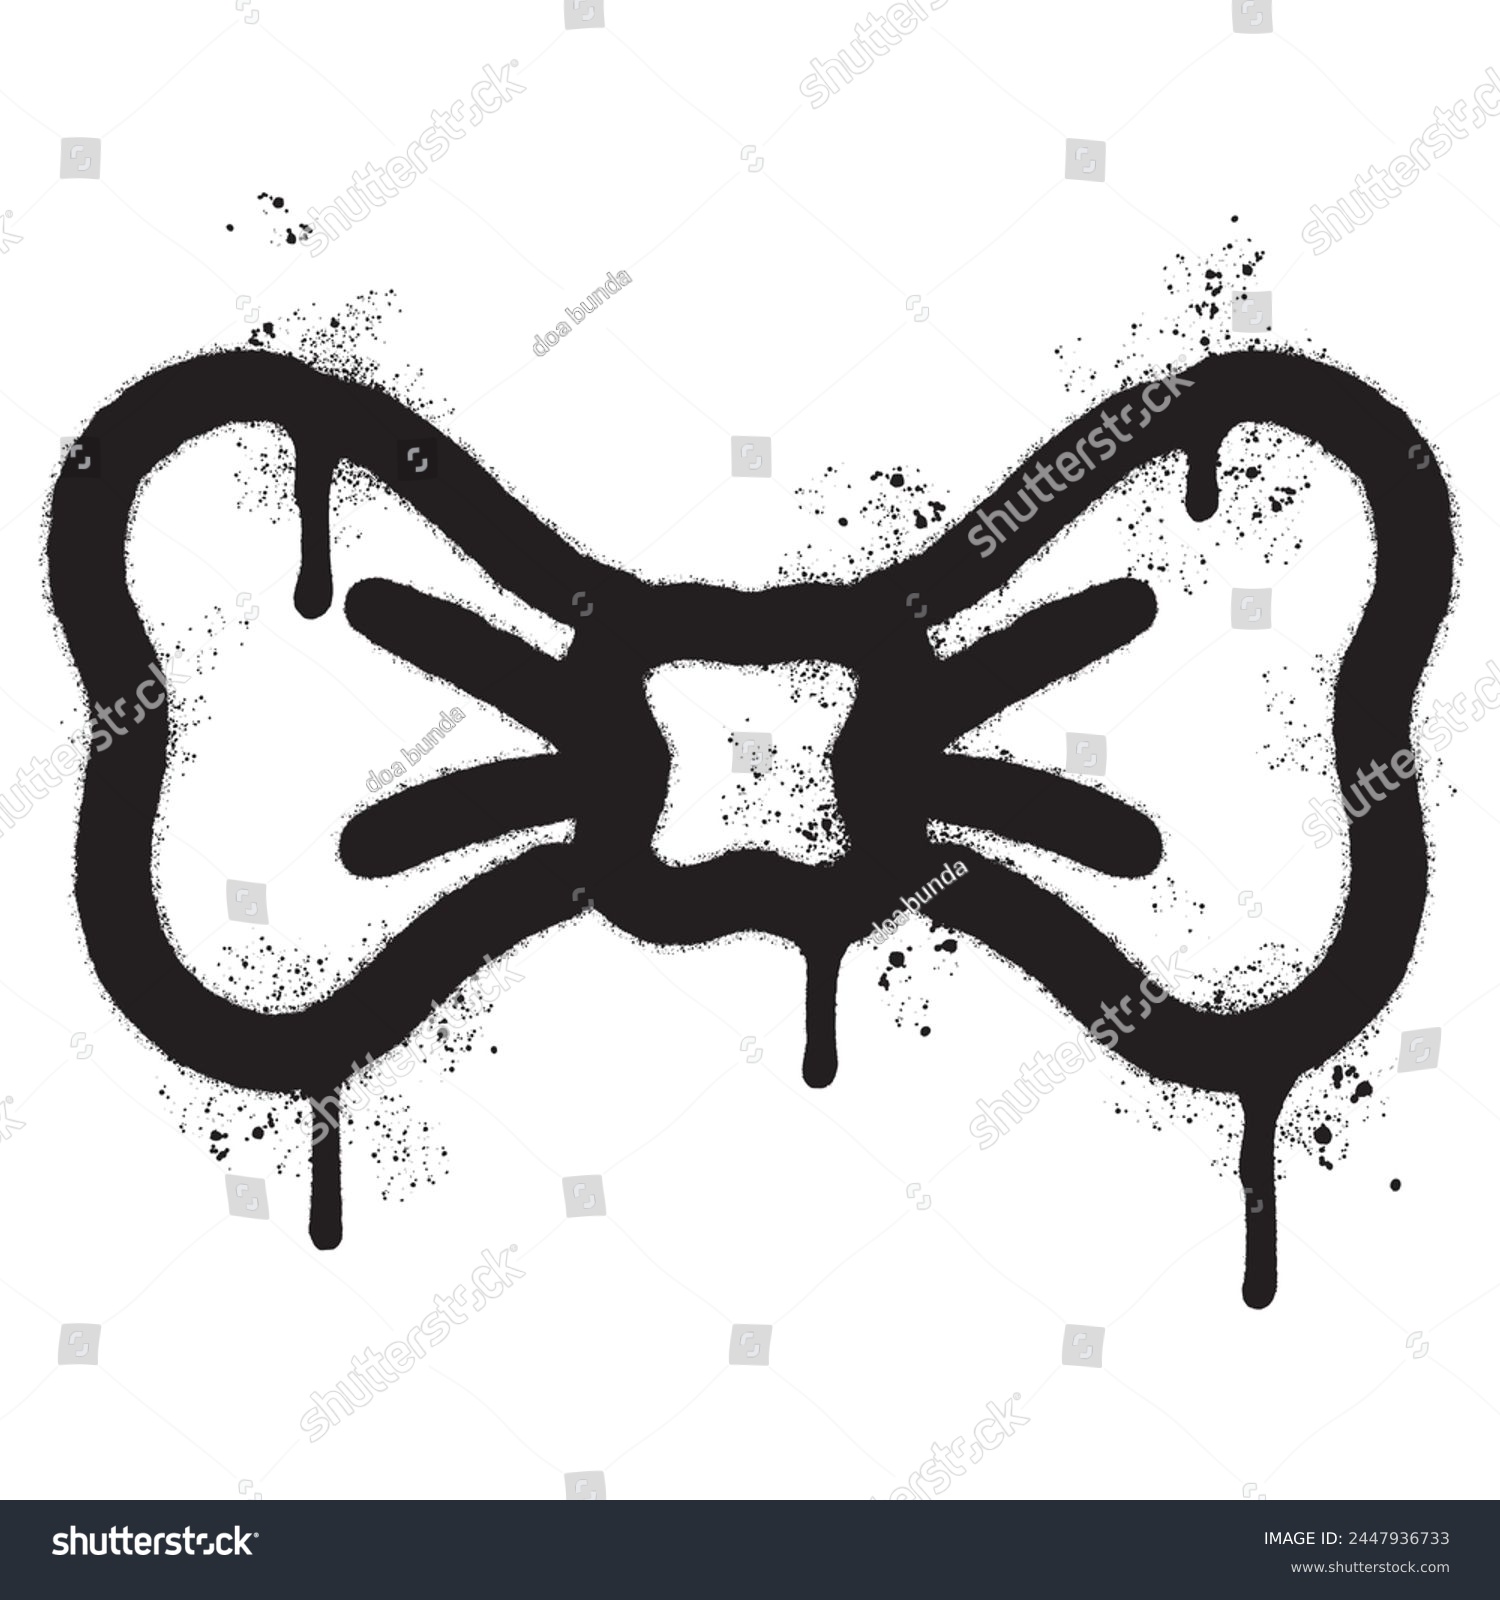 SVG of Spray Painted Graffiti Bow tie icon Sprayed isolated with a white background. svg